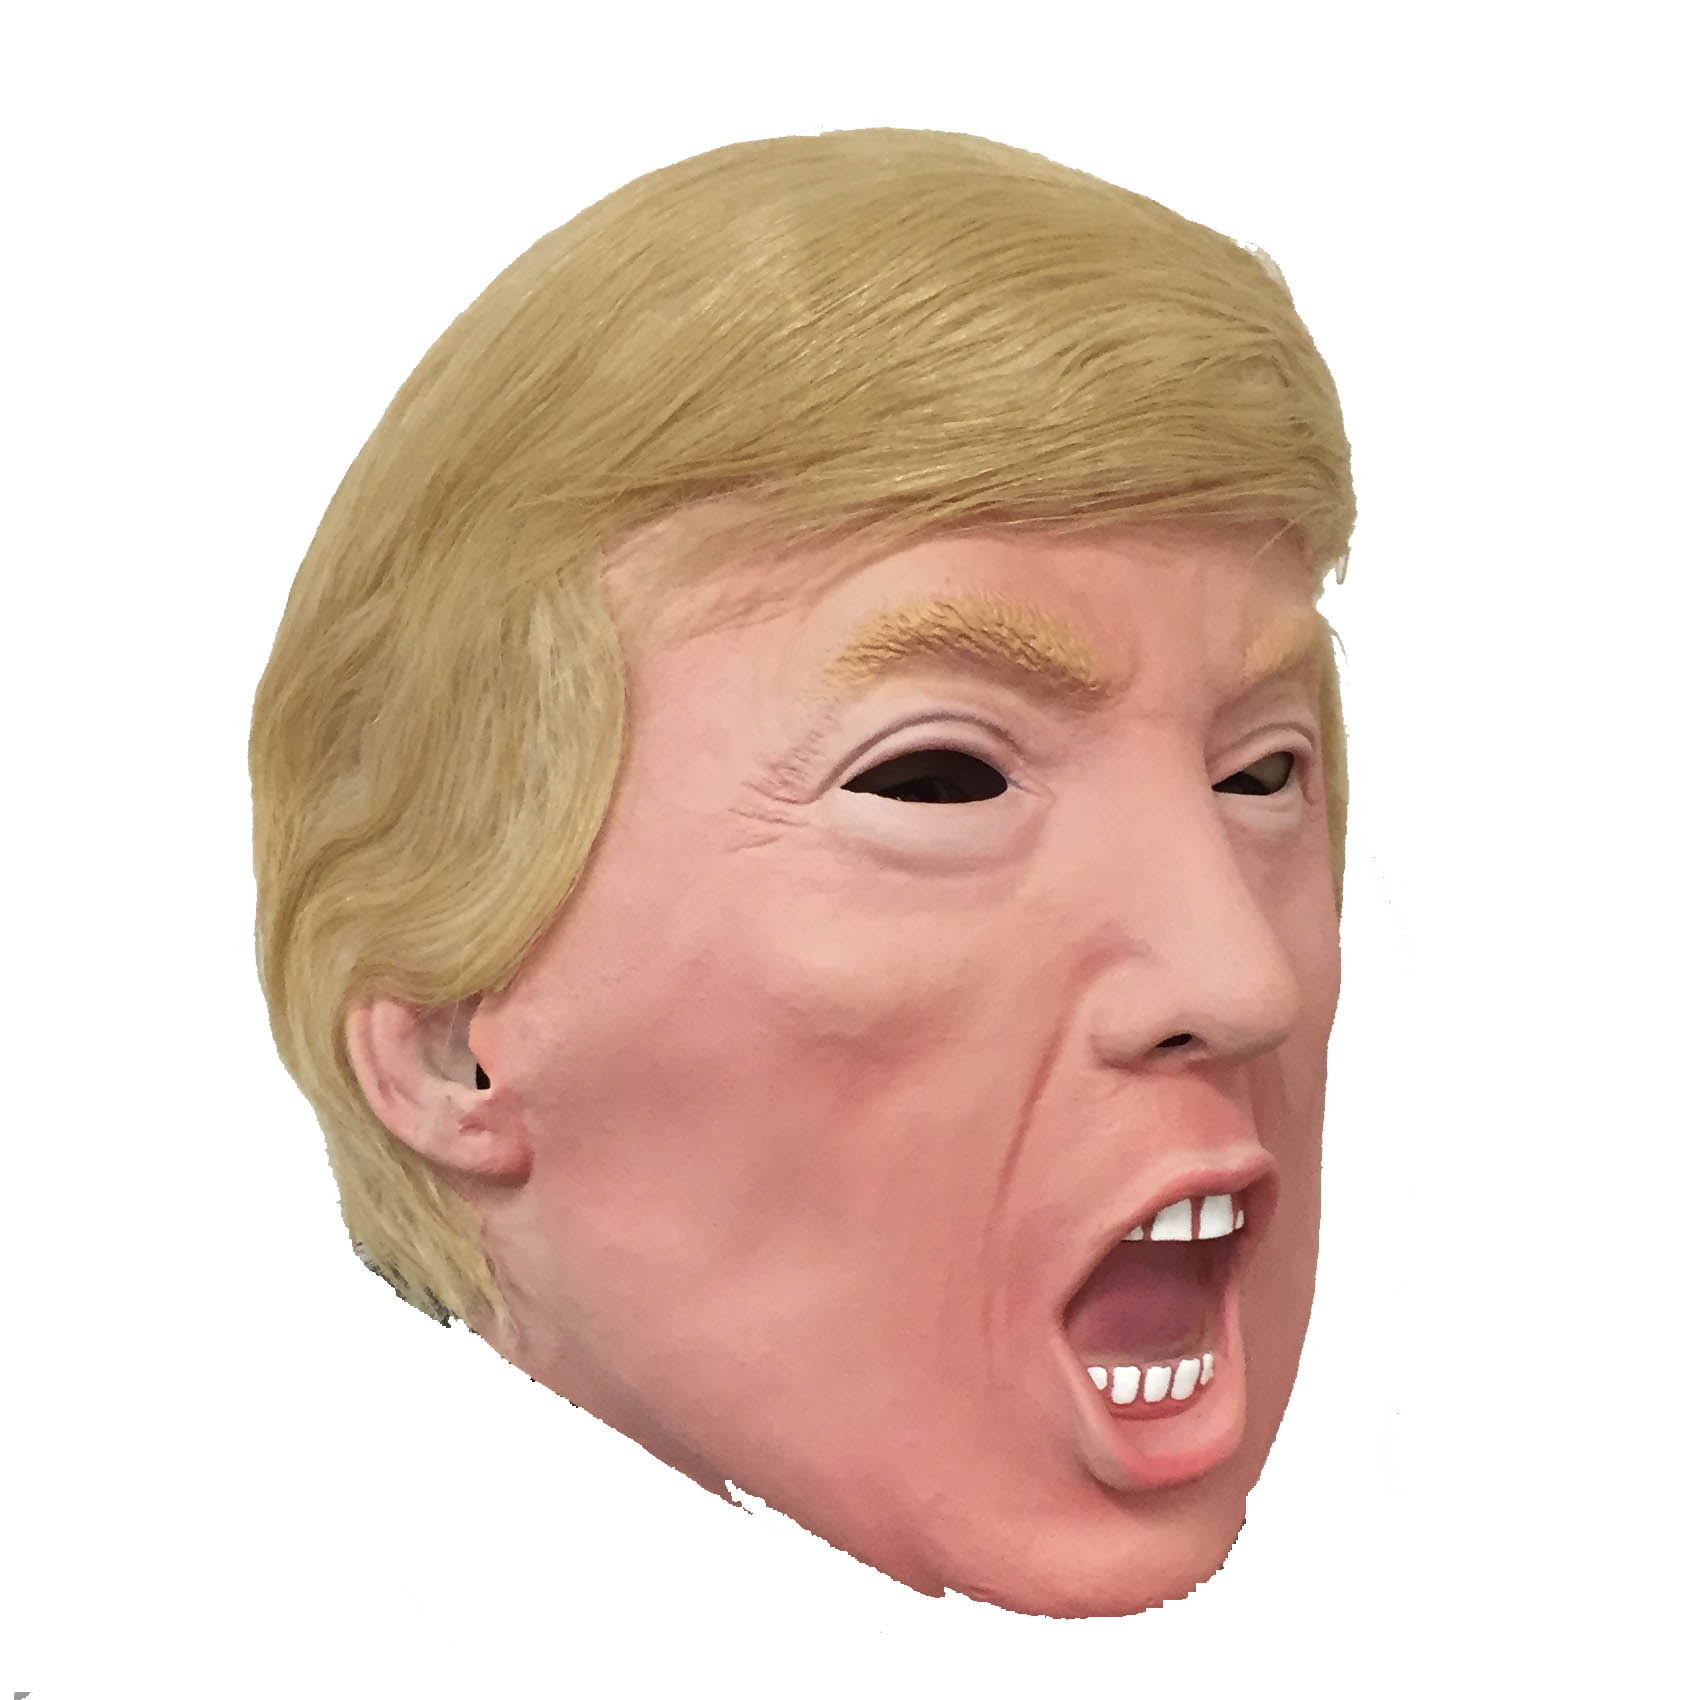 Donald Trump Celebrity Republican President Candidate 3/4 Mask with ...